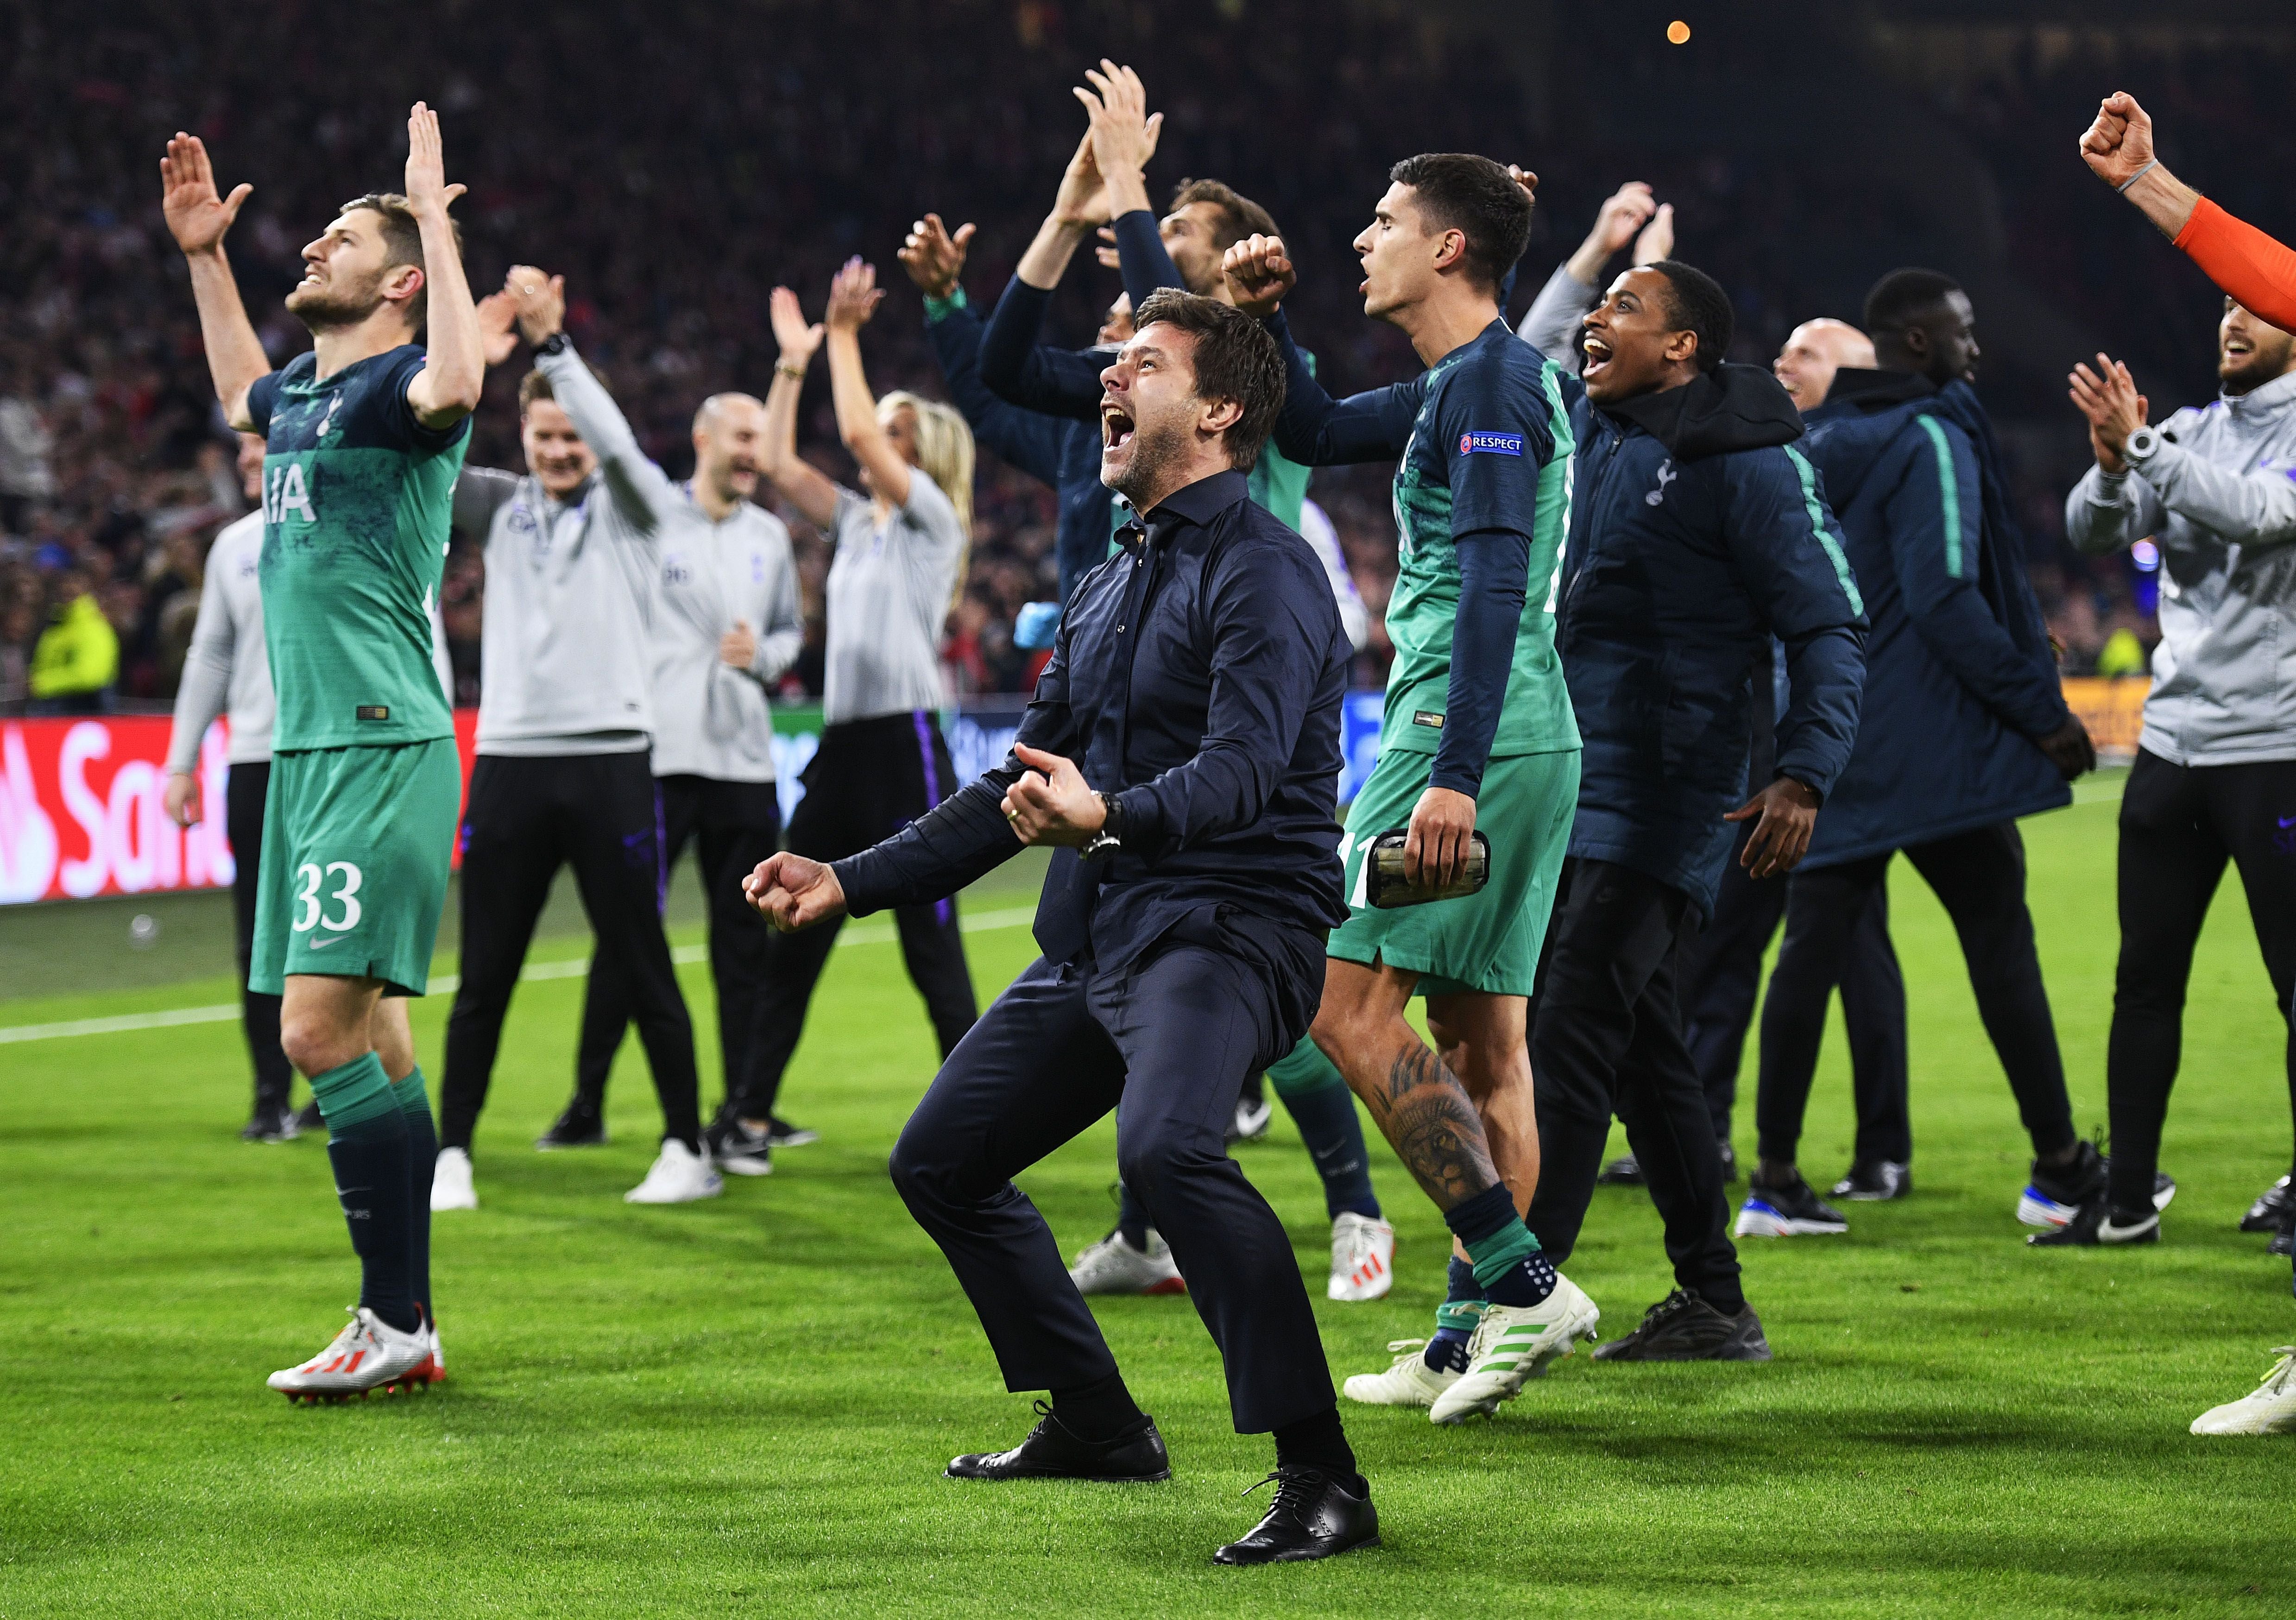 Guiding Tottenham to the Champions League final was Pochettino’s crowning moment at Spurs